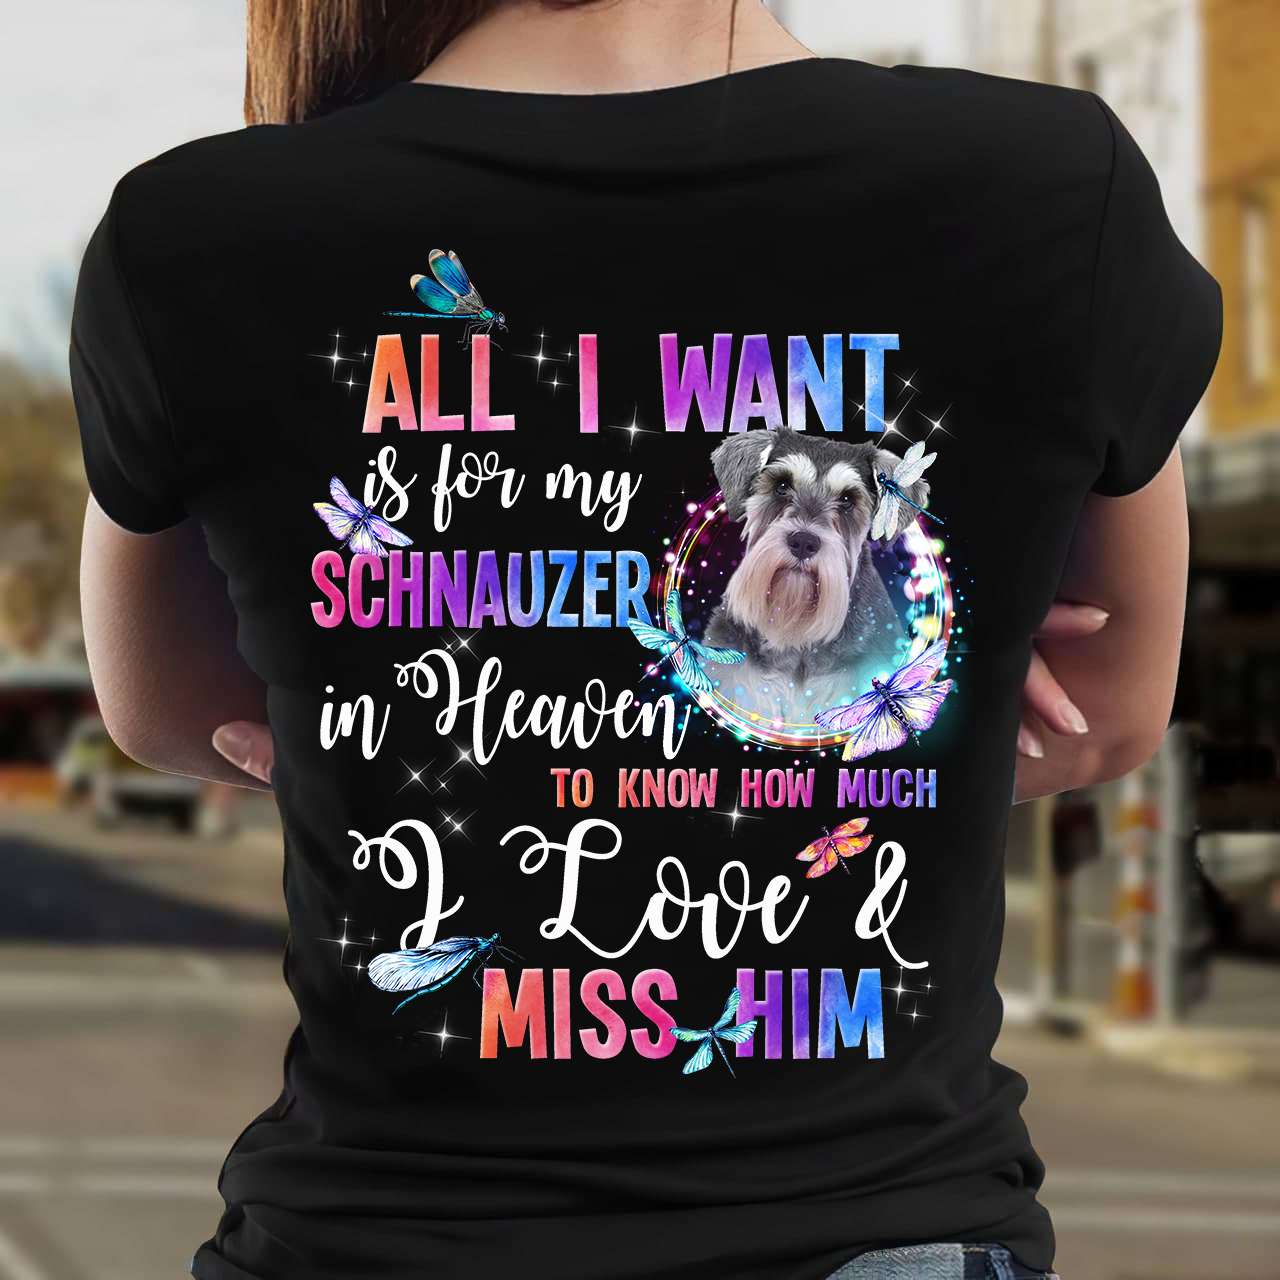 All I want is for my Schnauzer in heaven to know how much I love and miss him - Schnauzer dog lover